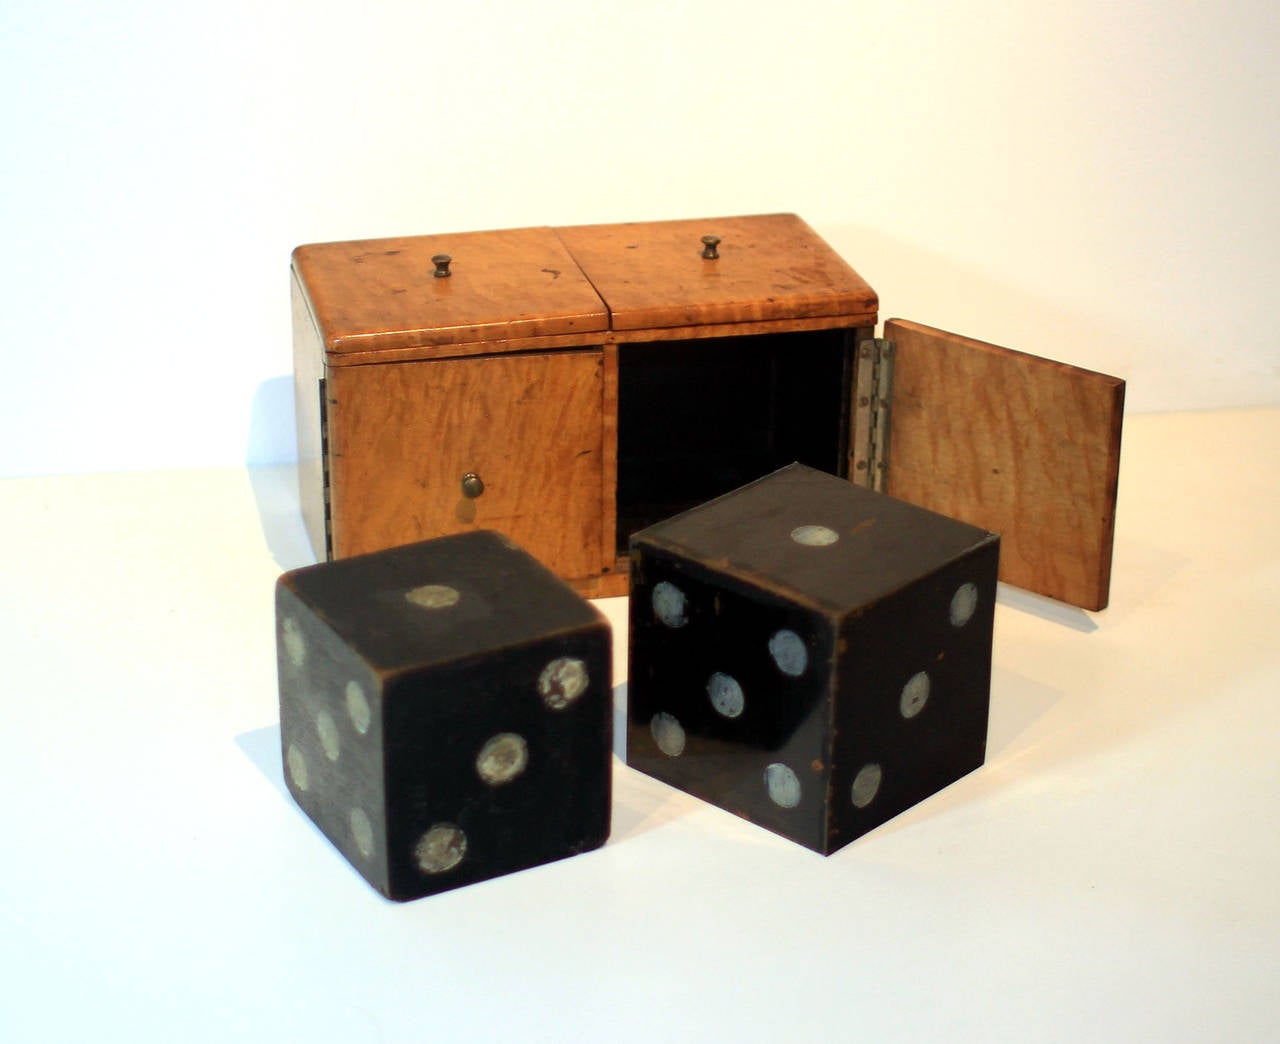 Fine figured maple magician's magic trick box with dice, one wood and one four-sided metal, all original; late 19th century, American. Very handsome.